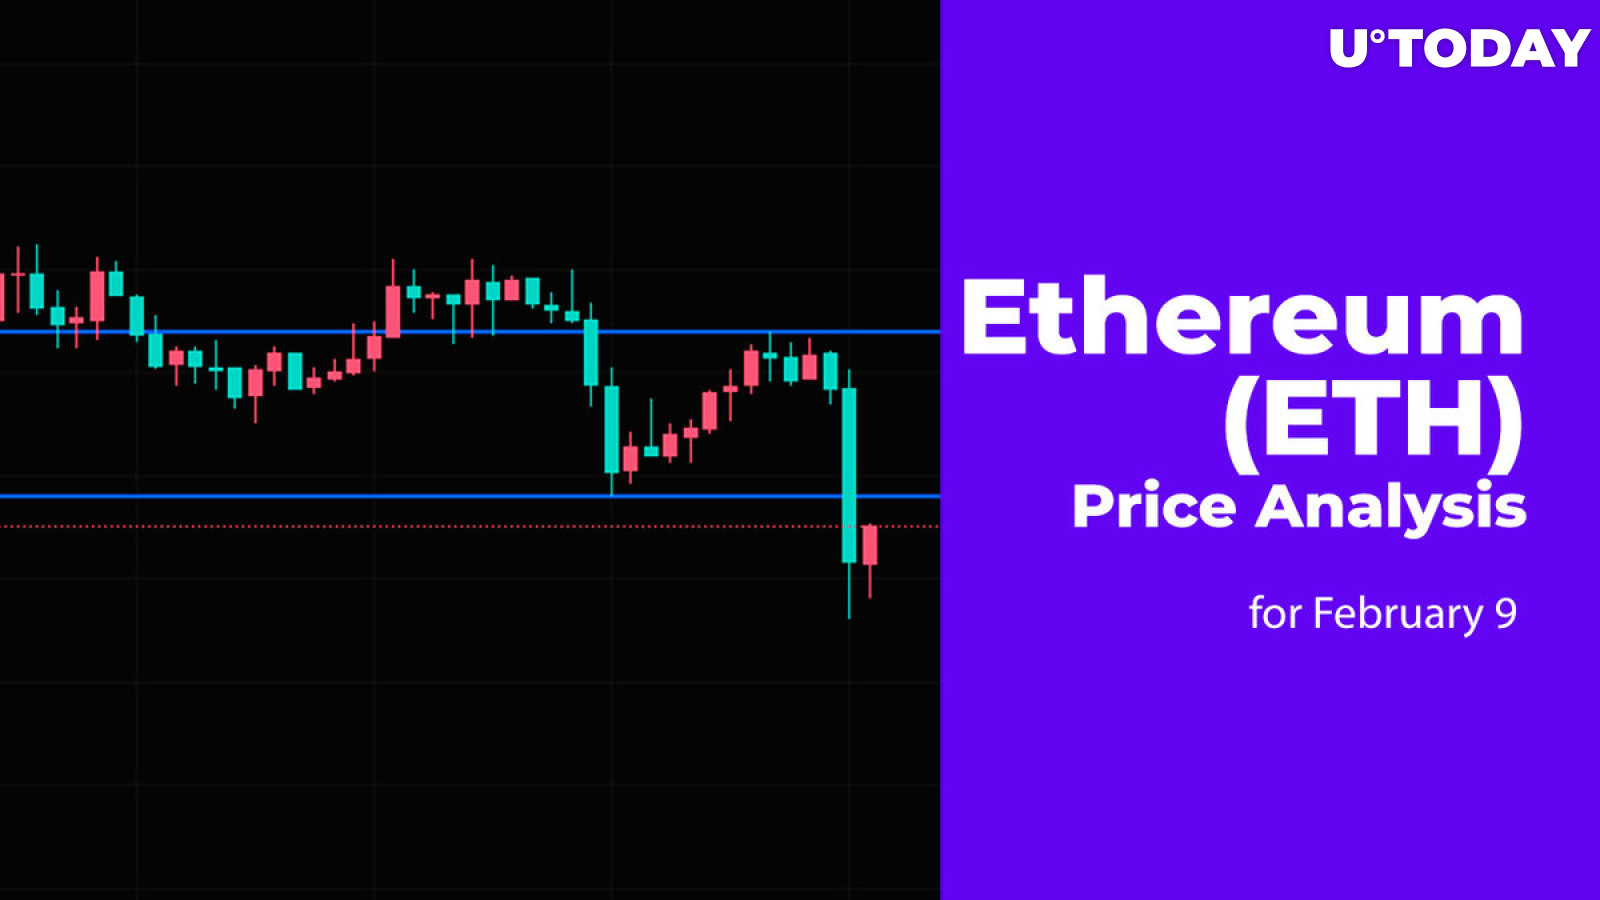 Ethereum (ETH) Price Analysis for February 9